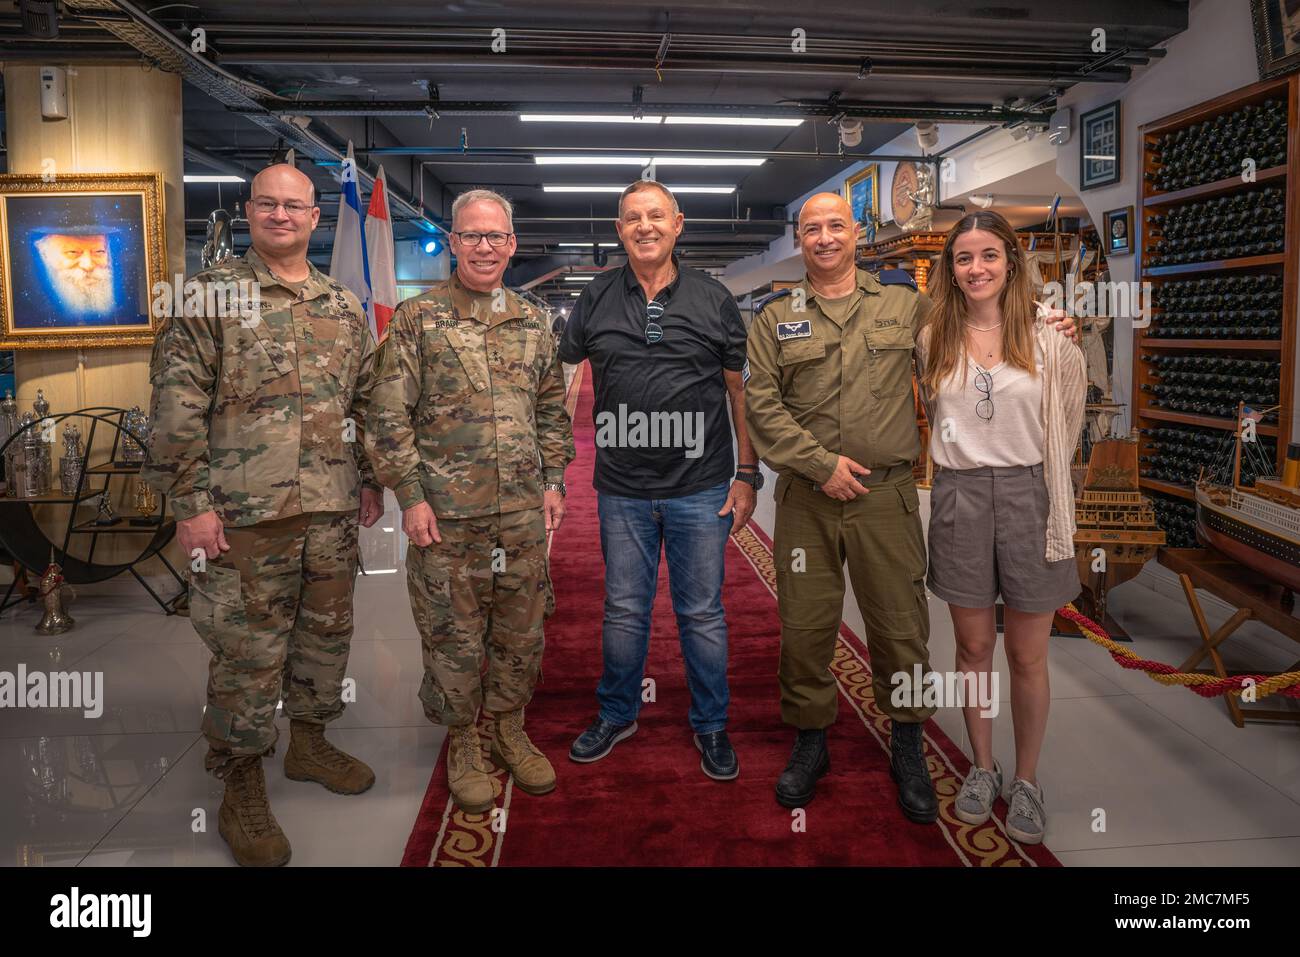 (Left to Right) U.S. Army Command Chief Warrant Officer 5 Wesley Dohogn, Maj. Gen. Greg Brady, Commanding General of the 10th Army Air and Missile Defense Command, Mr. Moshe Levy, Israeli Defense Forces Brig. Gen. Doron Gavish and his daughter pose for a photo during a meeting on June 26, 2022, in Tel Aviv, Israel. Mr. Levy received the Medal of Valor for his actions in Sinai during the Yom Kippur War in 1973. Maj. Gen. Brady had the honor of meeting Mr. Levy while in town to meet with Israeli Defense Force counterparts. Stock Photo